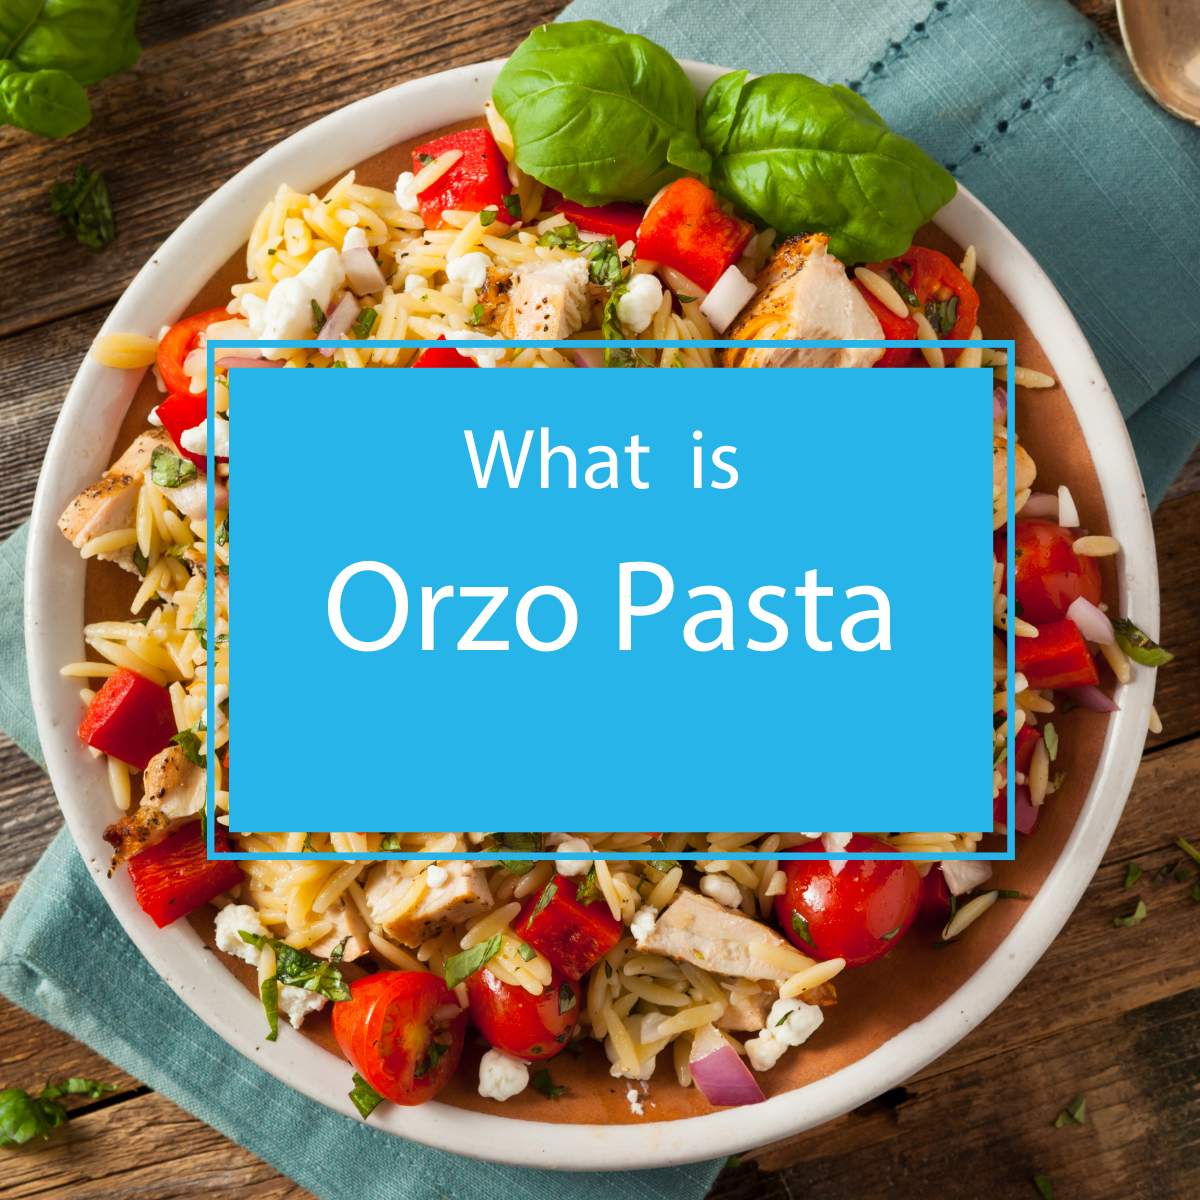 What is Orzo Pasta